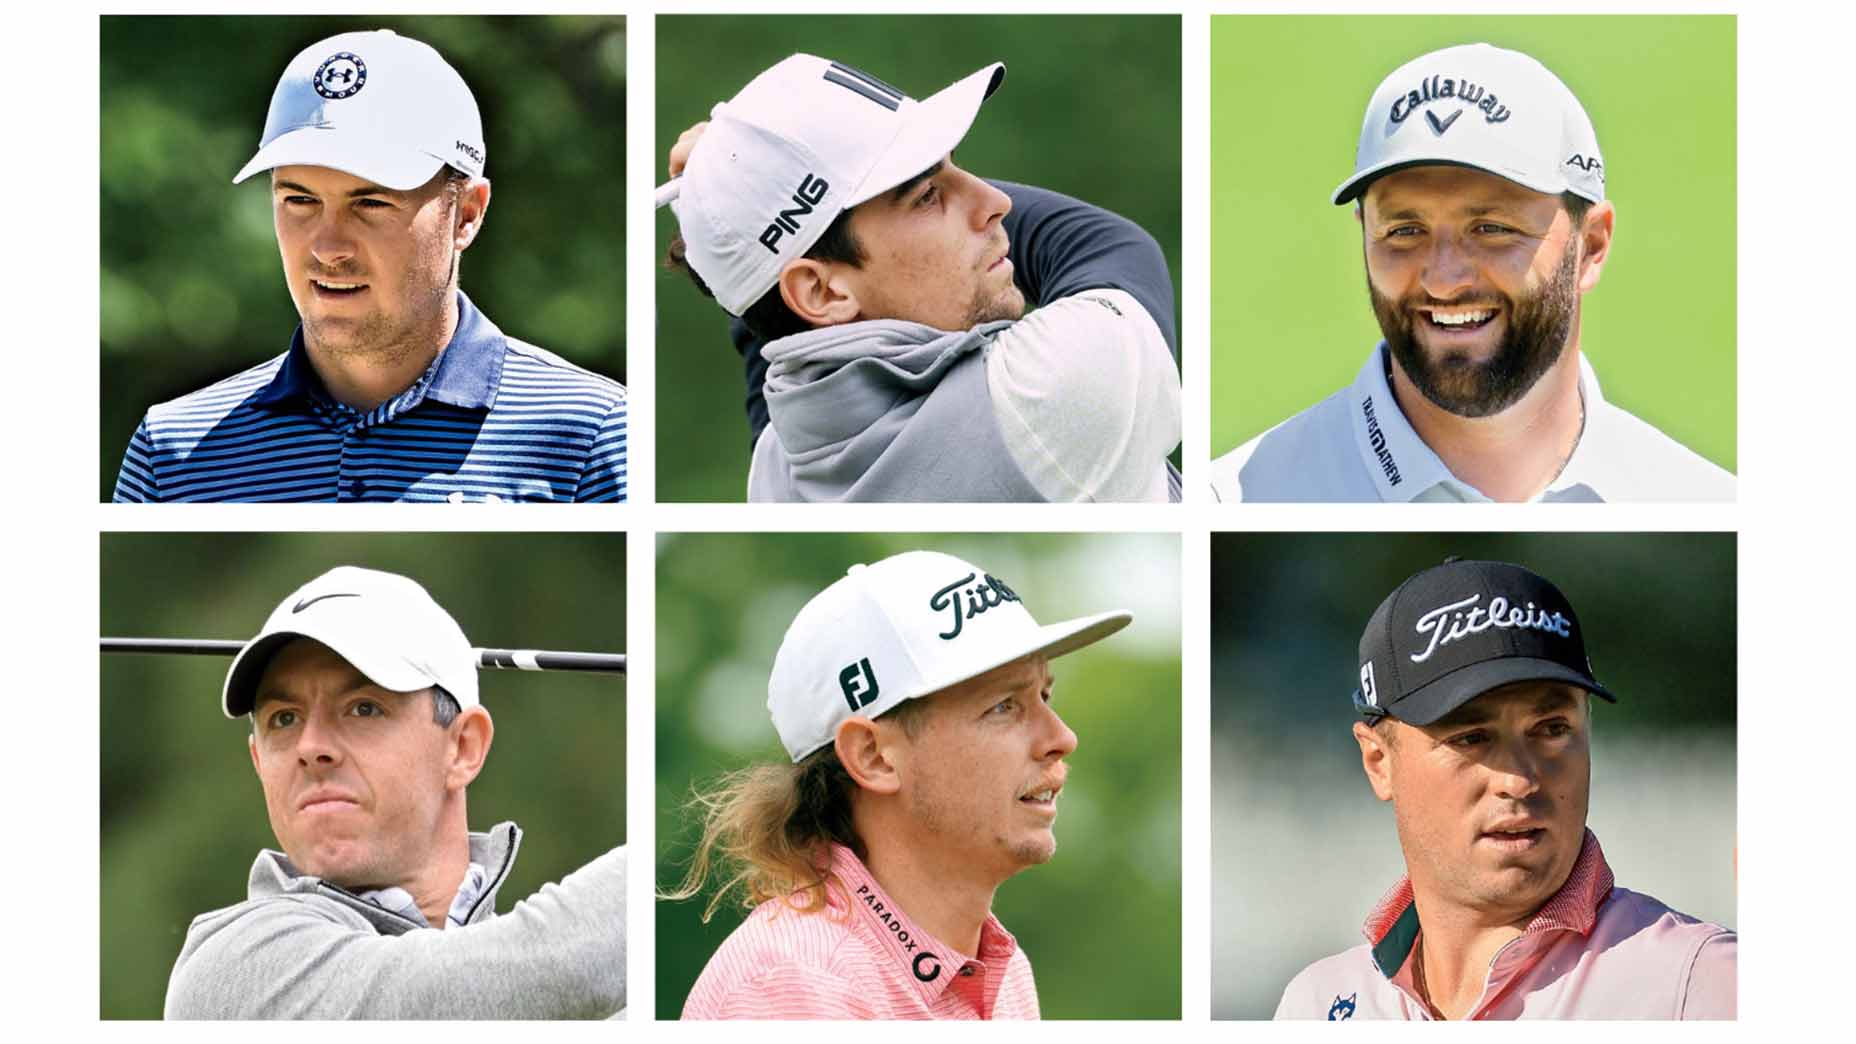 Six golfers with hopes of winning the Open Championship.